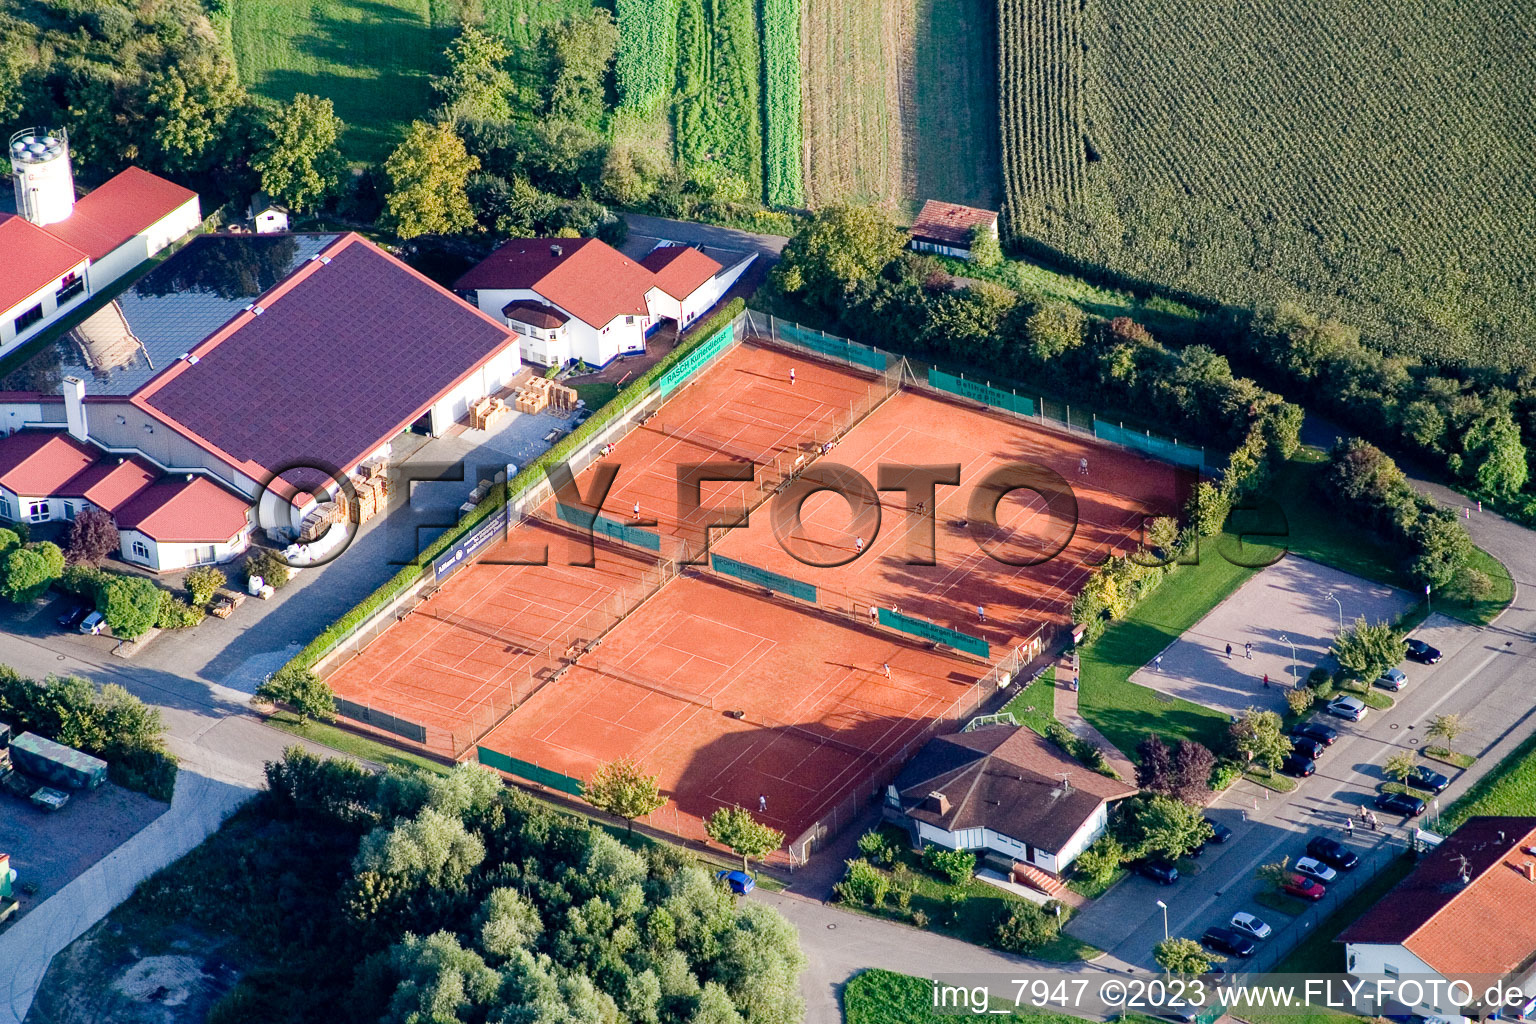 Aerial photograpy of Tennis club in Neuburg in the state Rhineland-Palatinate, Germany